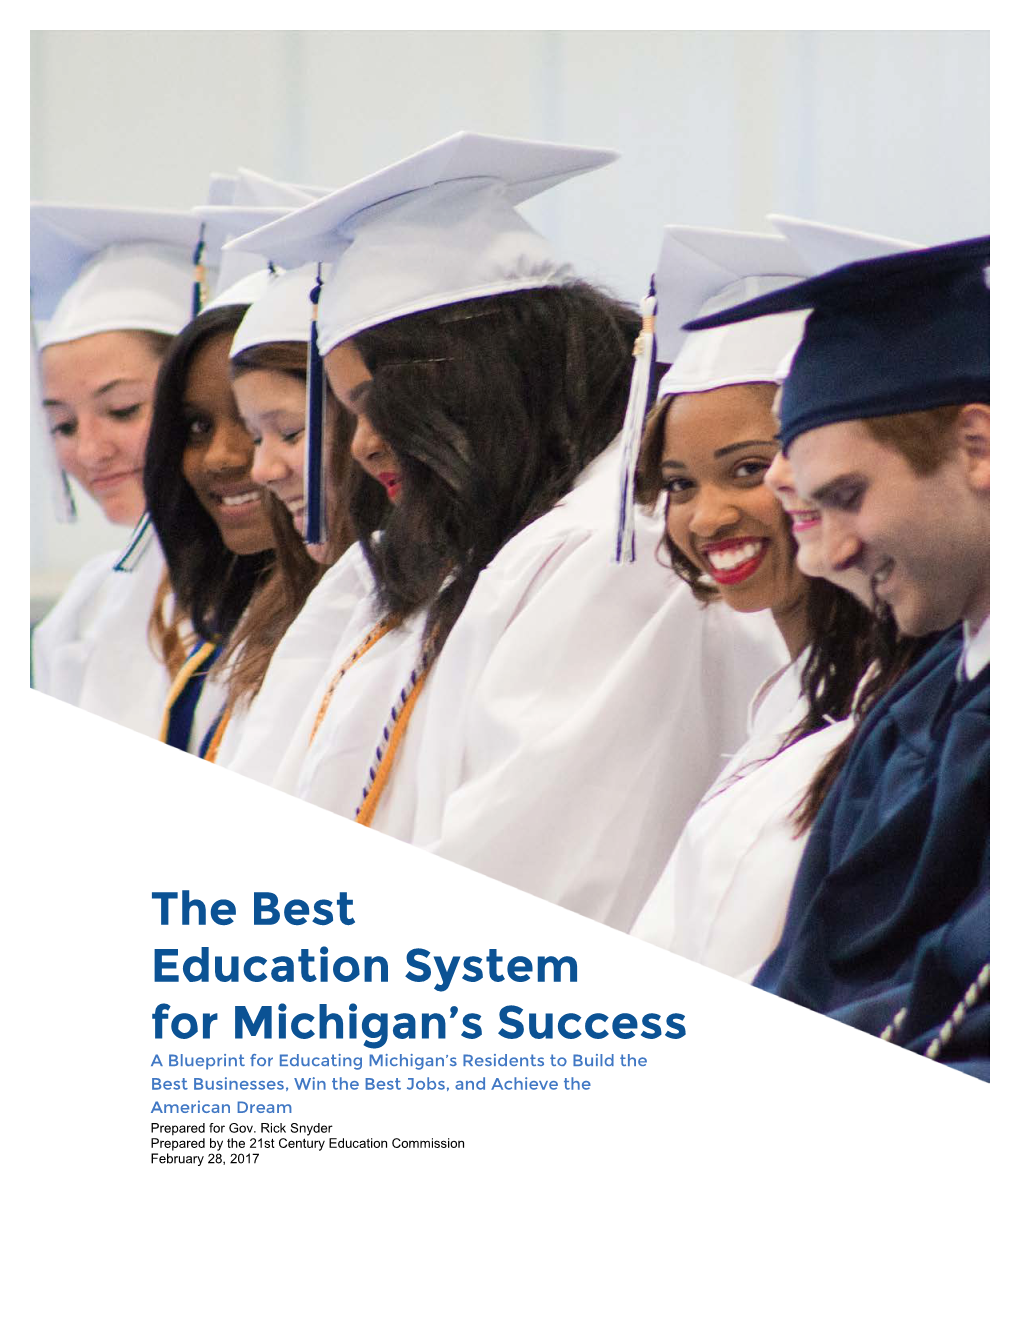 The Best Education System for Michigan's Success